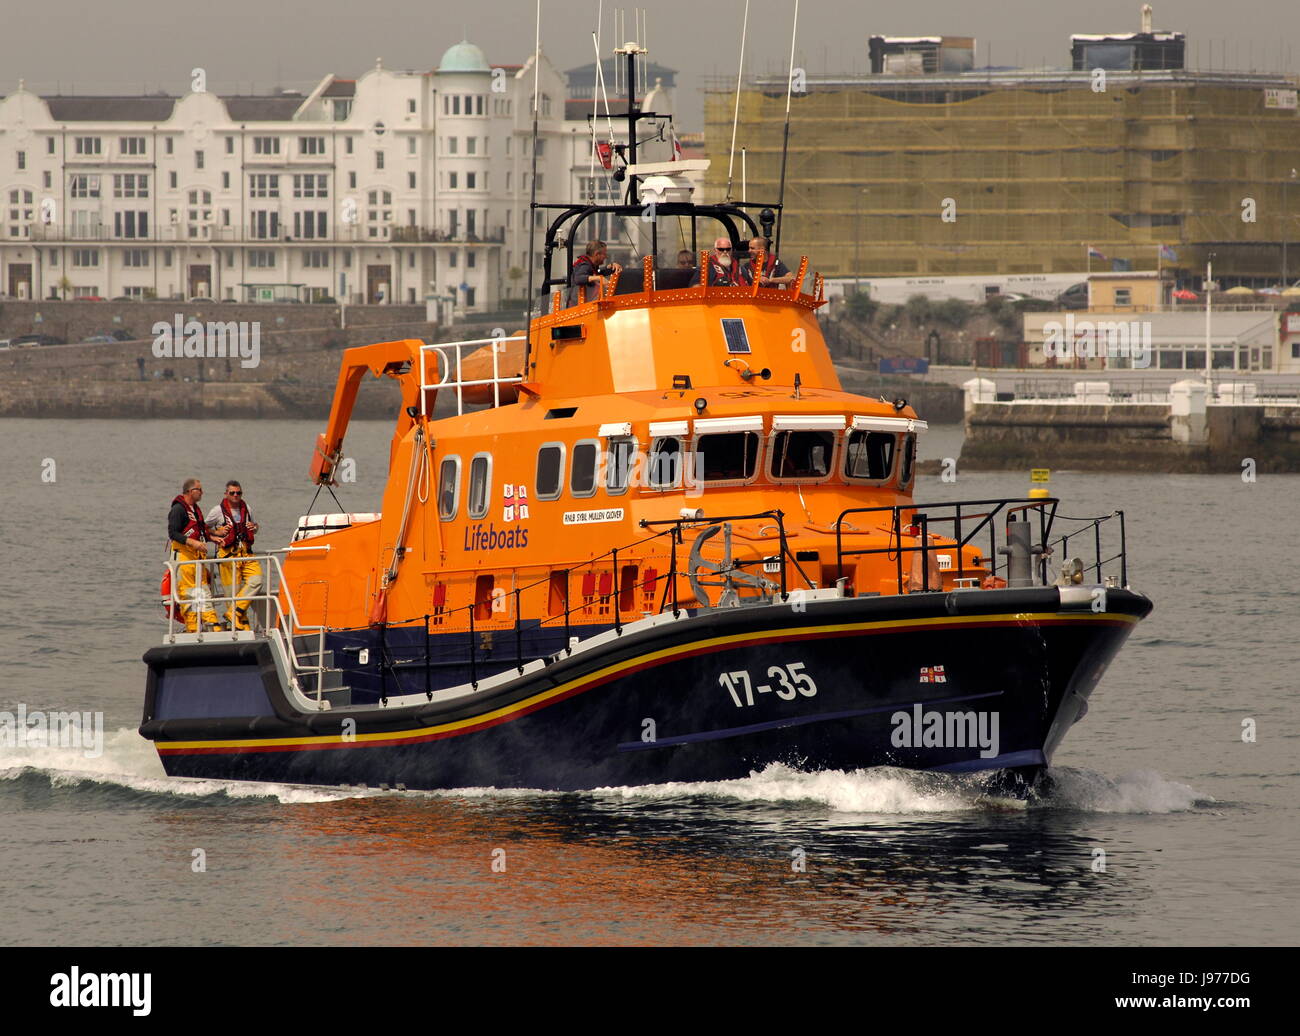 AJAXNETPHOTO. 29TH MAY, 2017. PLYMOUTH, ENGLAND. - LIFEBOAT - RNLB LIFEBOAT SYBIL MULLEN GLOVER HEADING FOR THE BARBICAN DOCK. PHOTO:JONATHAN EASTLAND/AJAX REF:D172905 6528 Stock Photo